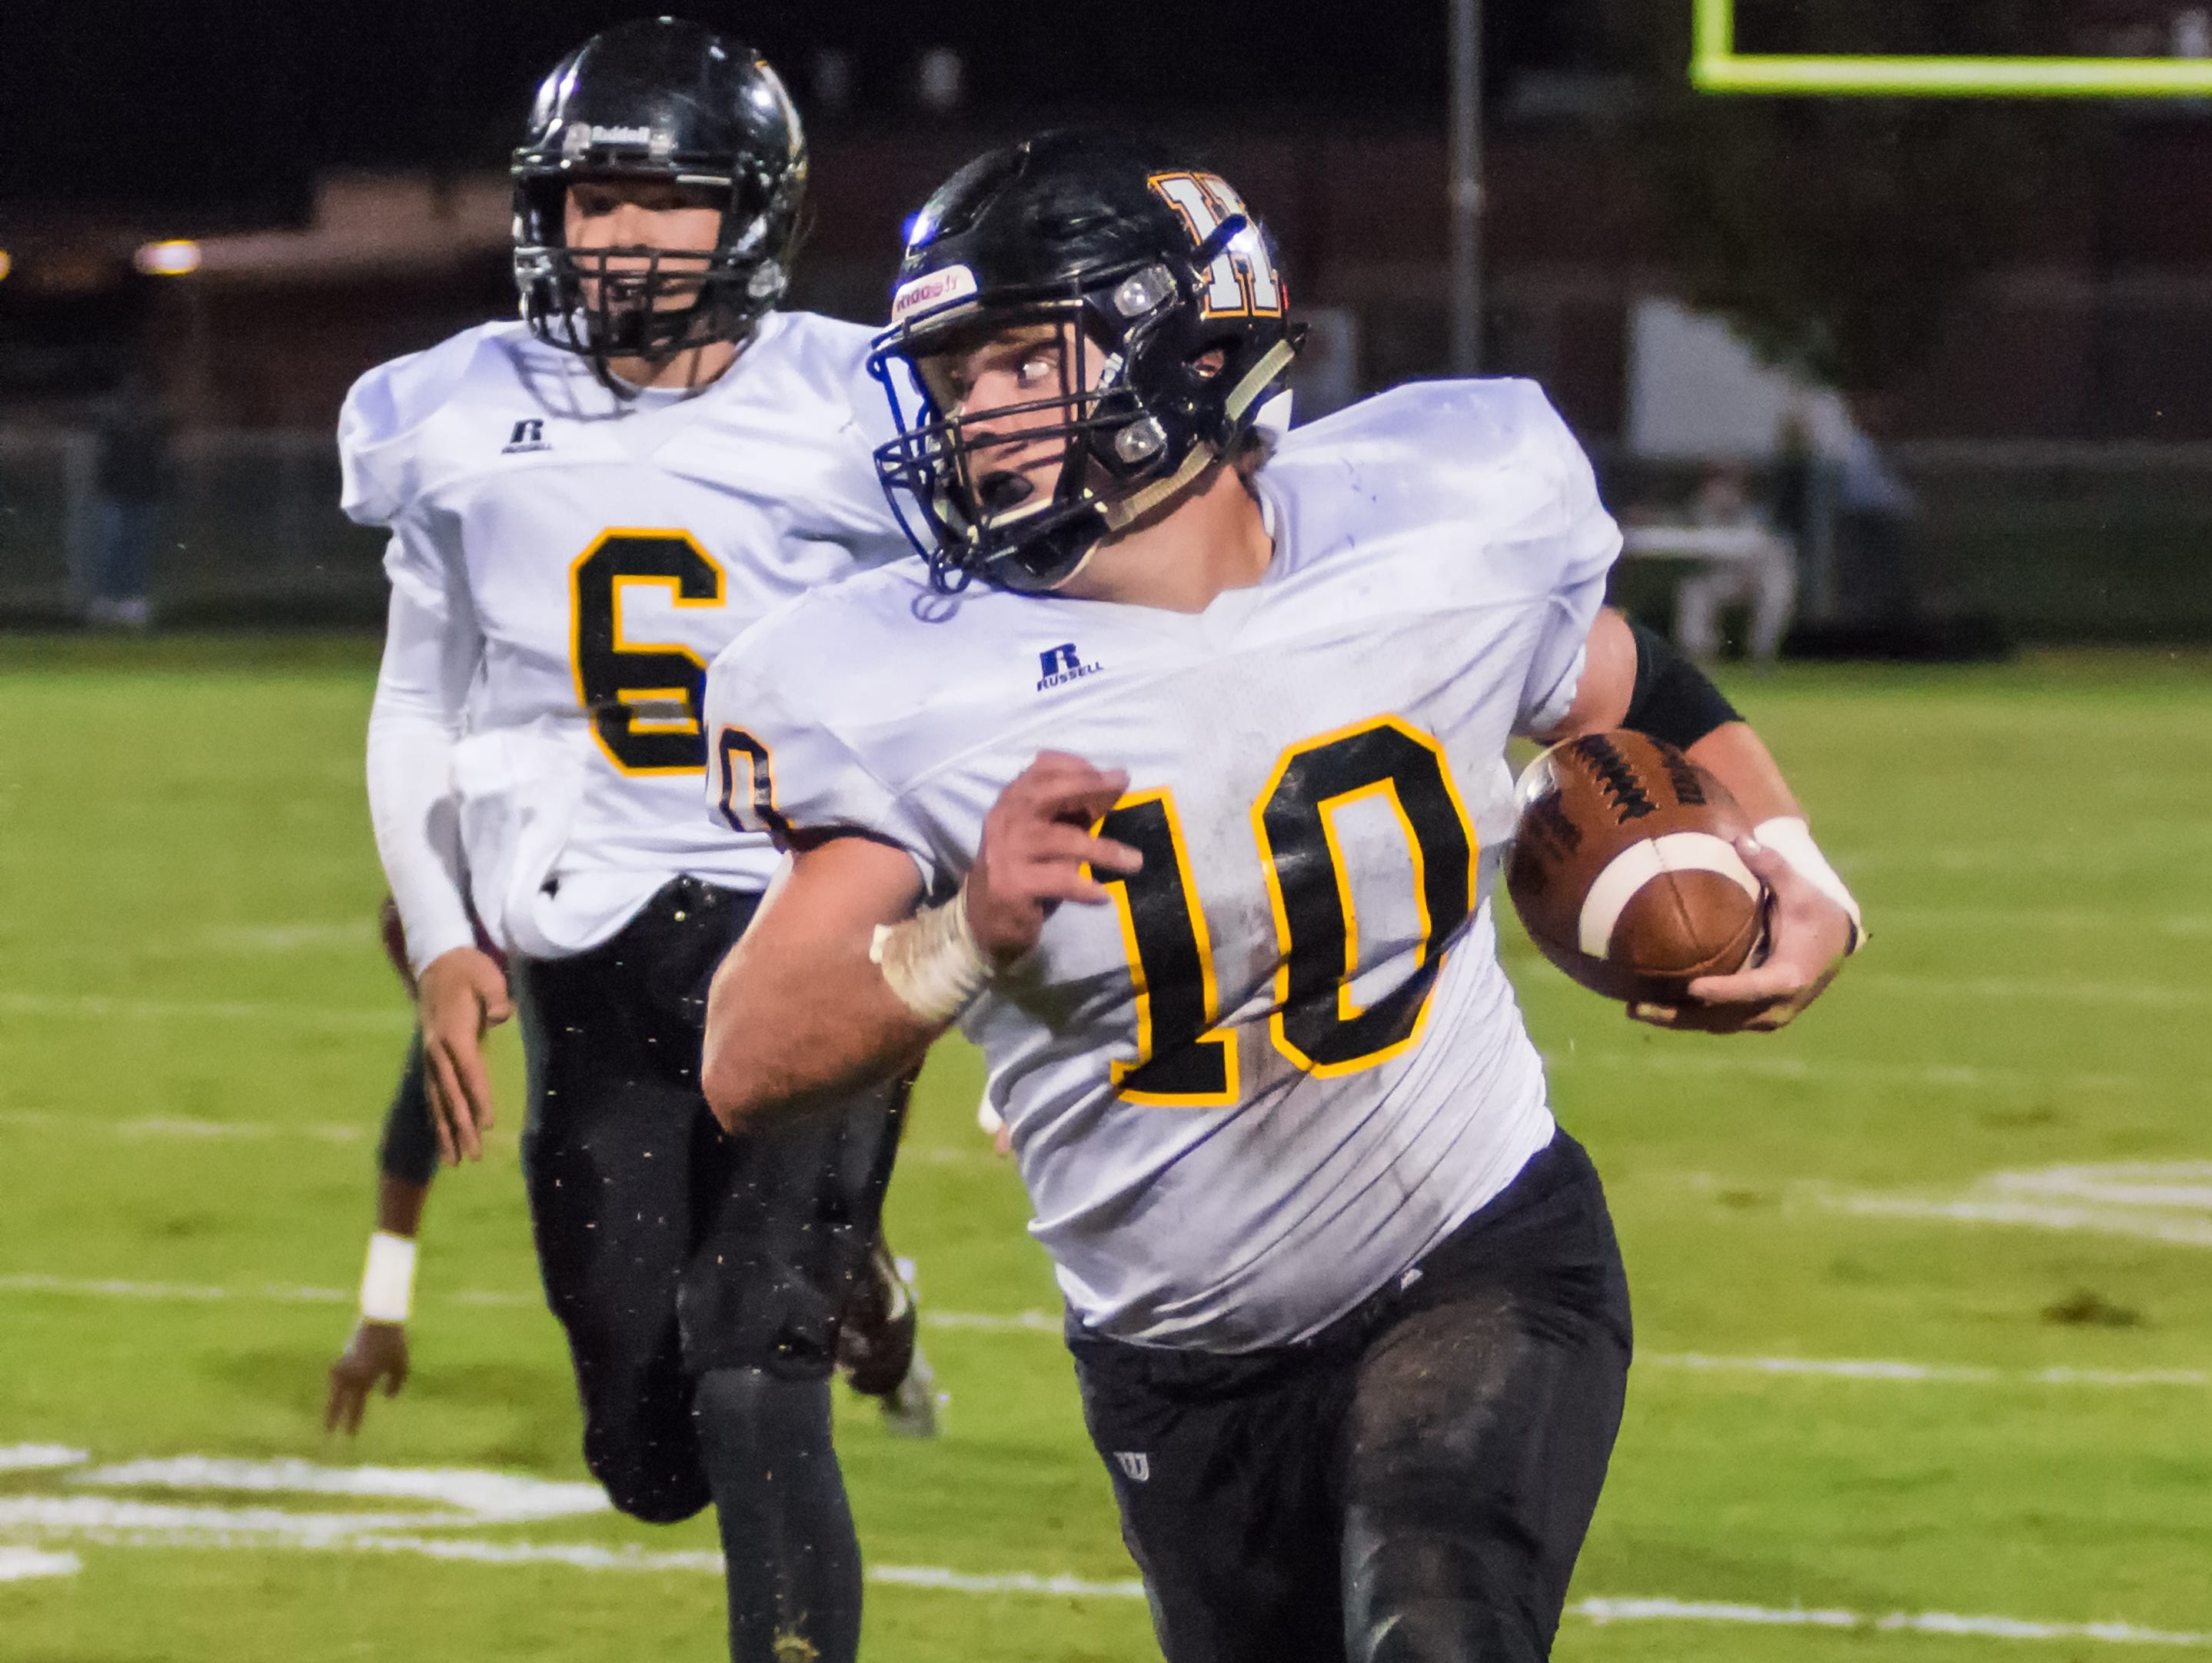 Hendersonville High senior Jack Towe carries the ball upfield as sophomore quarterback Brett Coker follows the play during Friday's contest.